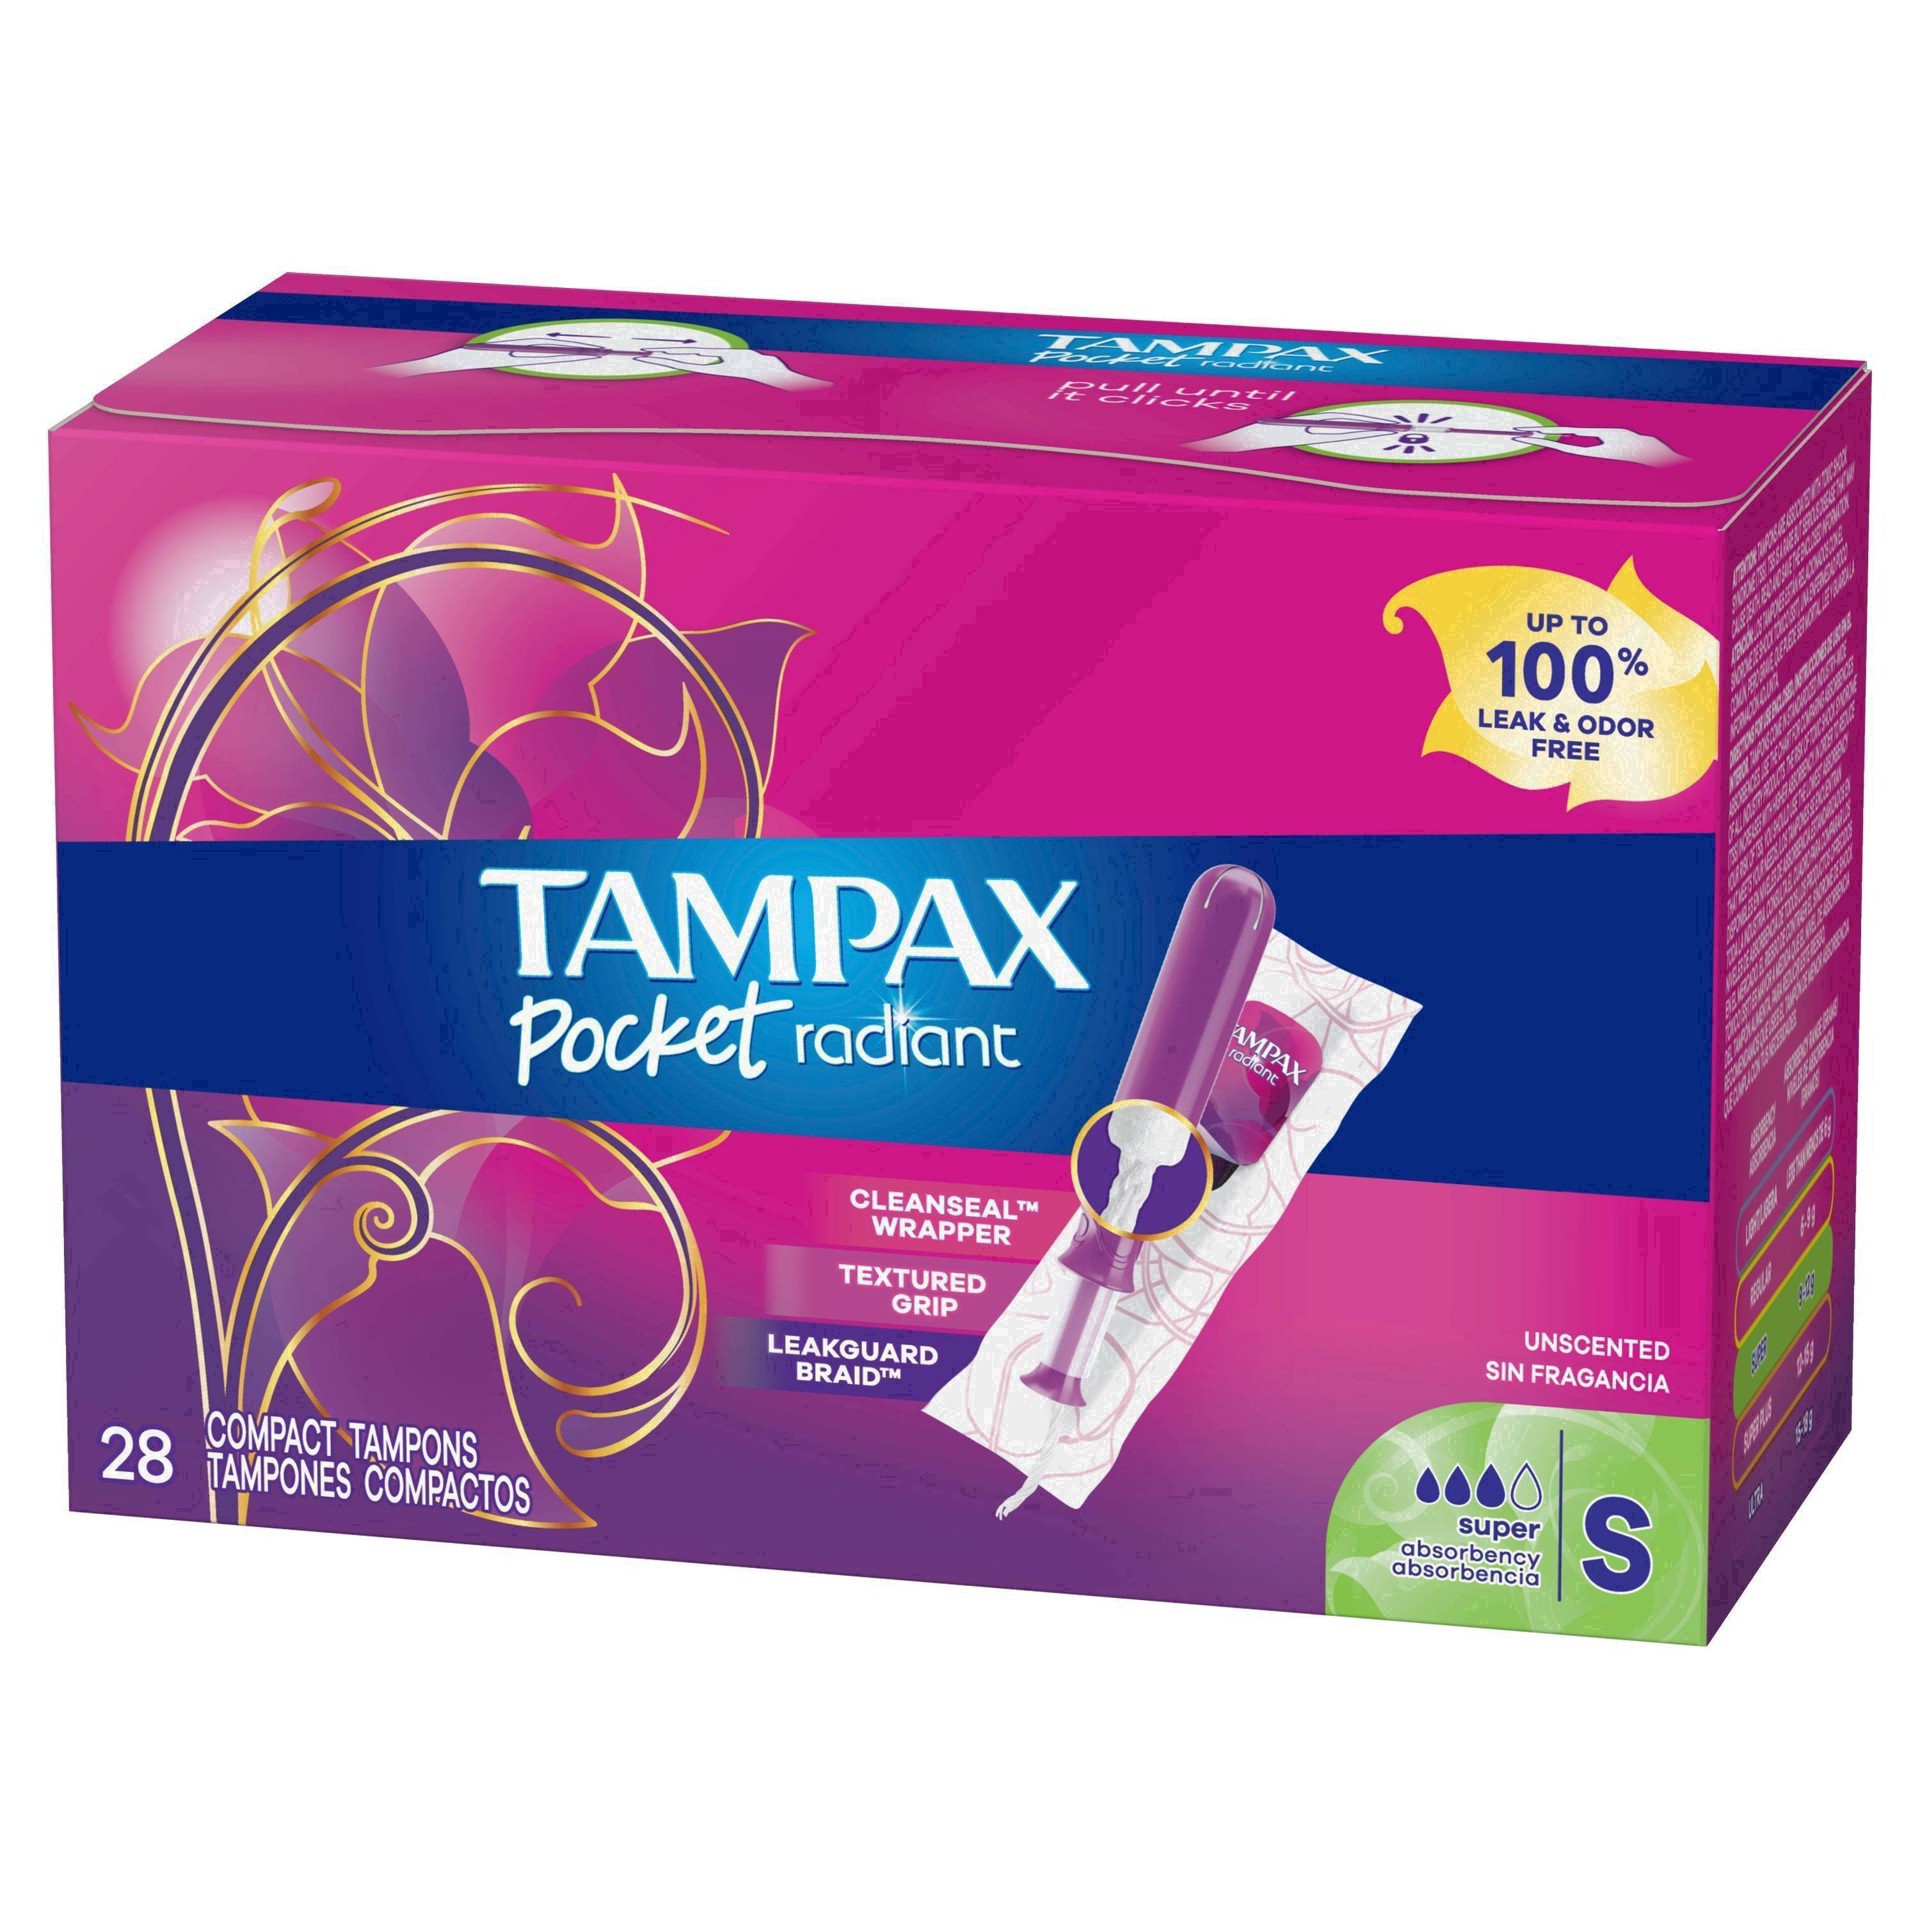 slide 17 of 94, Tampax Pocket Radiant Compact Plastic Tampons, With LeakGuard Braid, Super Absorbency, Unscented, 28 Count, 28 ct